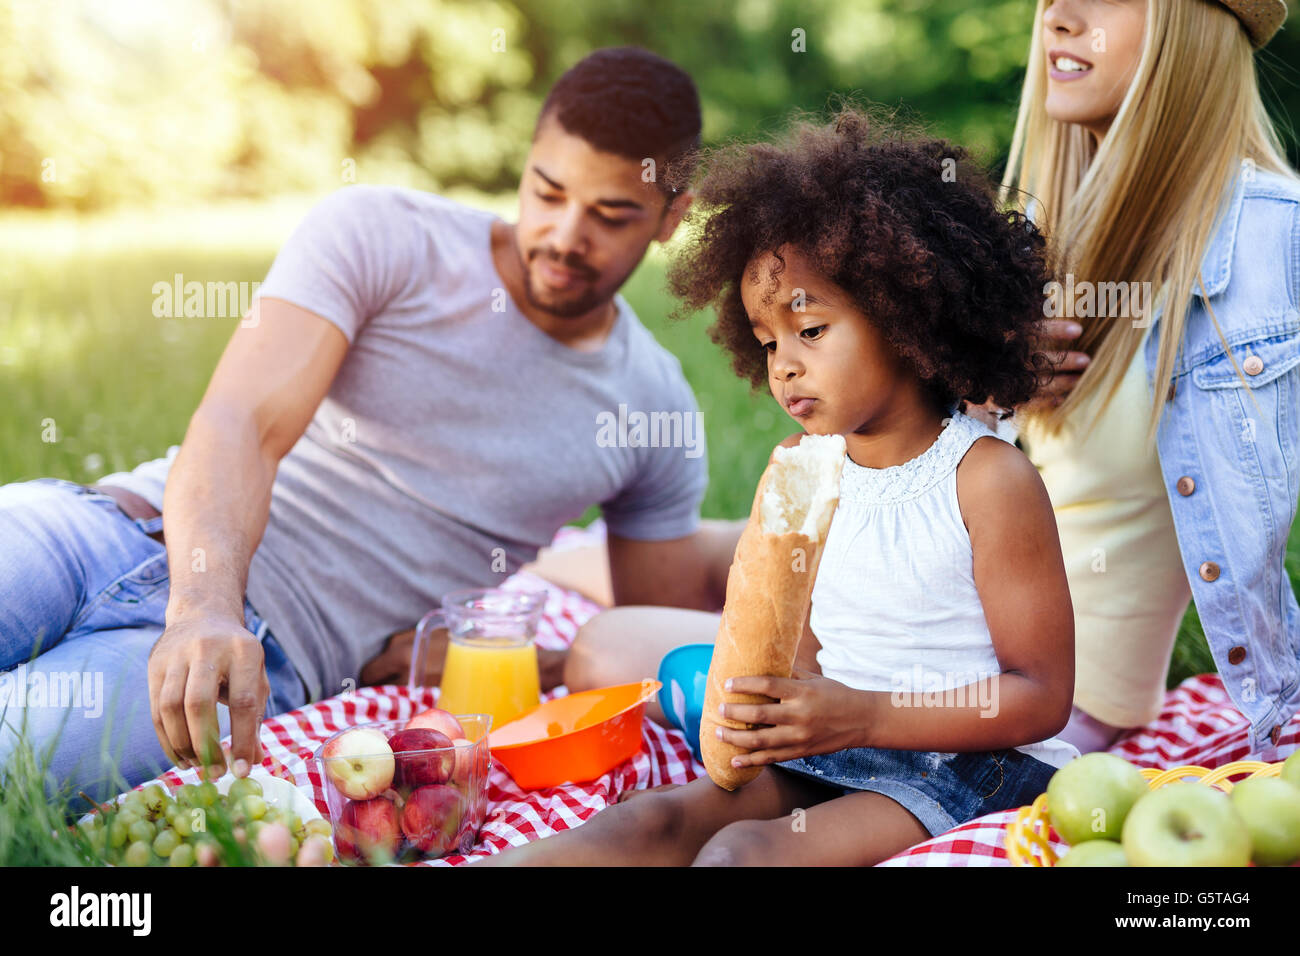 Beautiful afro kid holding baguette while picnicking Stock Photo